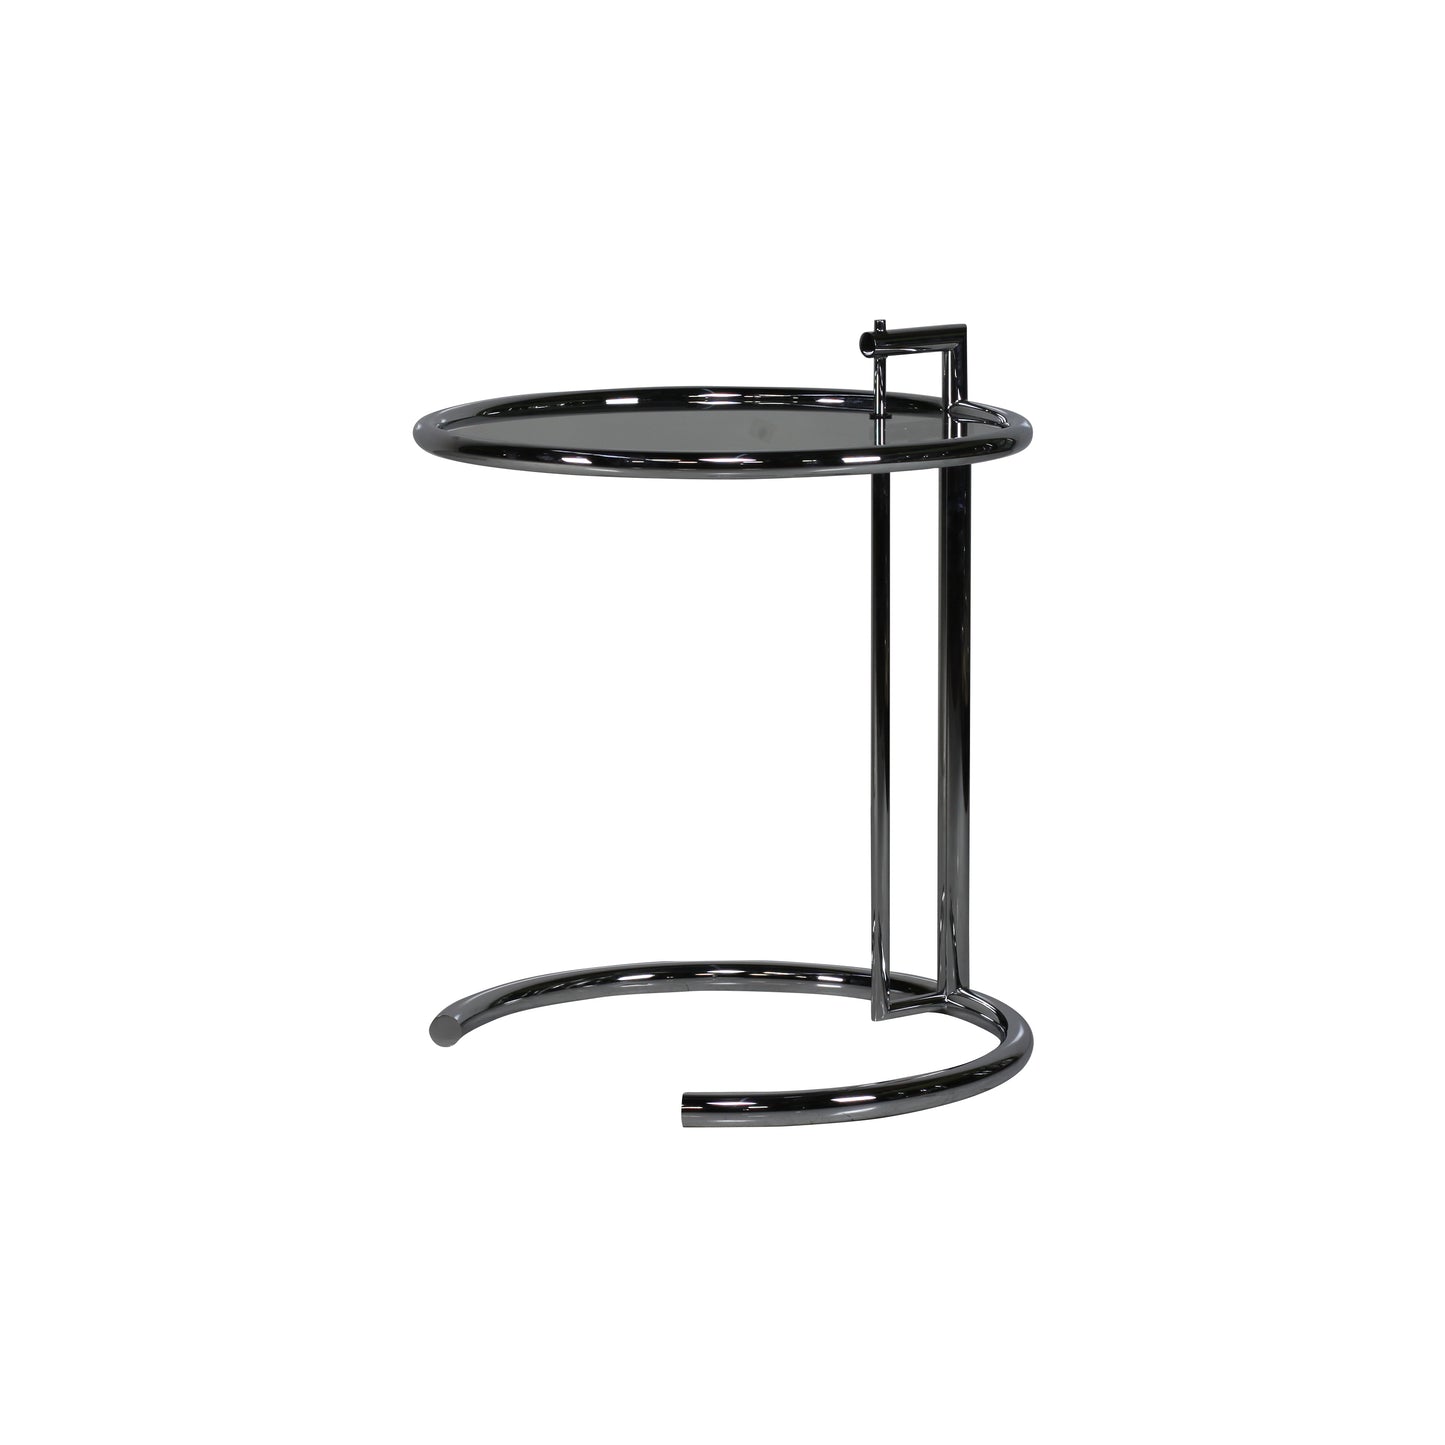 Adjustable table style | Black lacquered smoked glass | Side